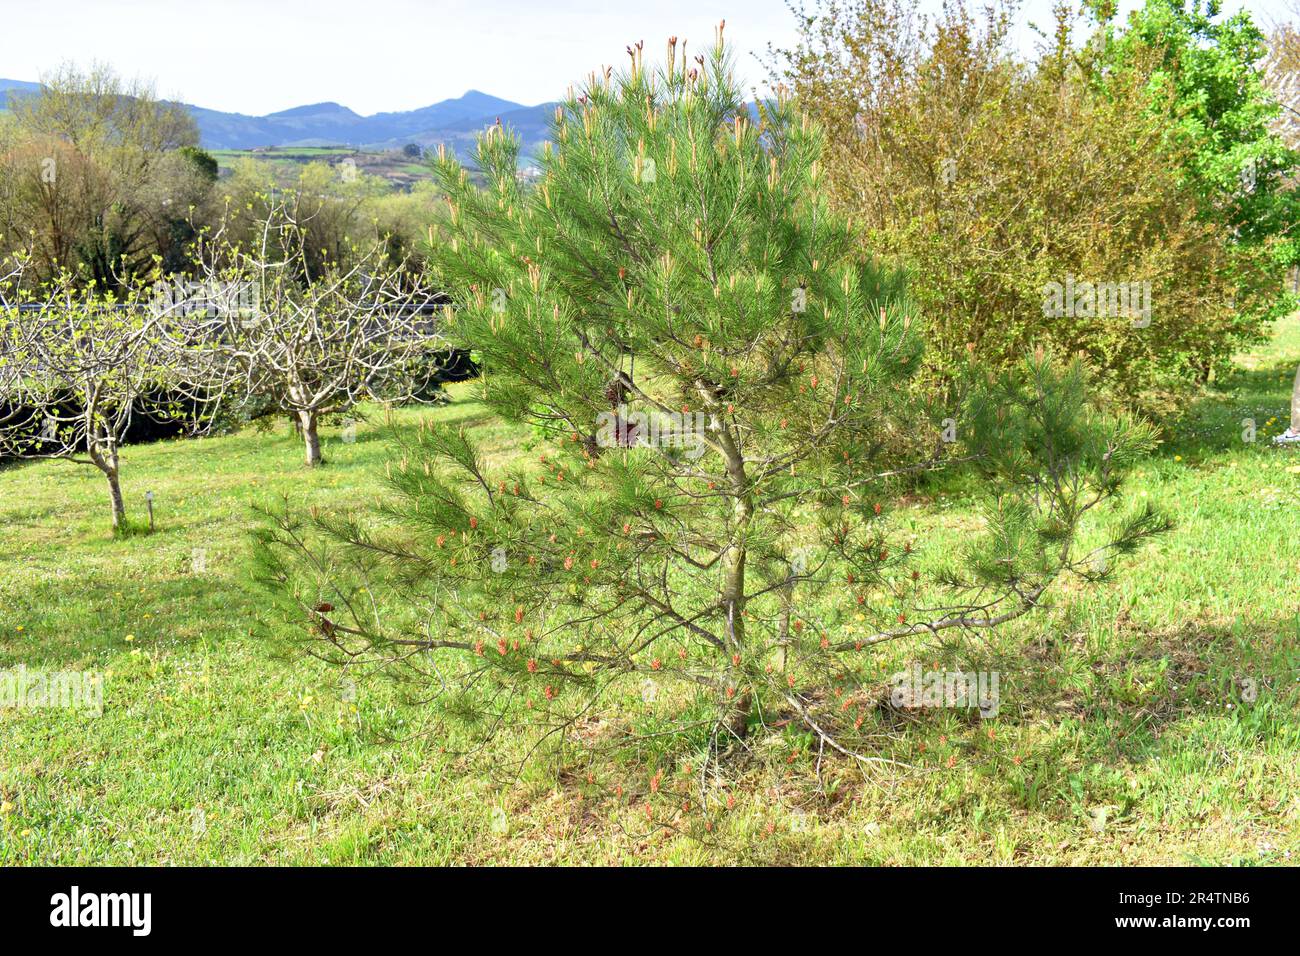 Macedonian pine (Pinus peuce), grown in a garden. It is a species native to the Balkans. Stock Photo